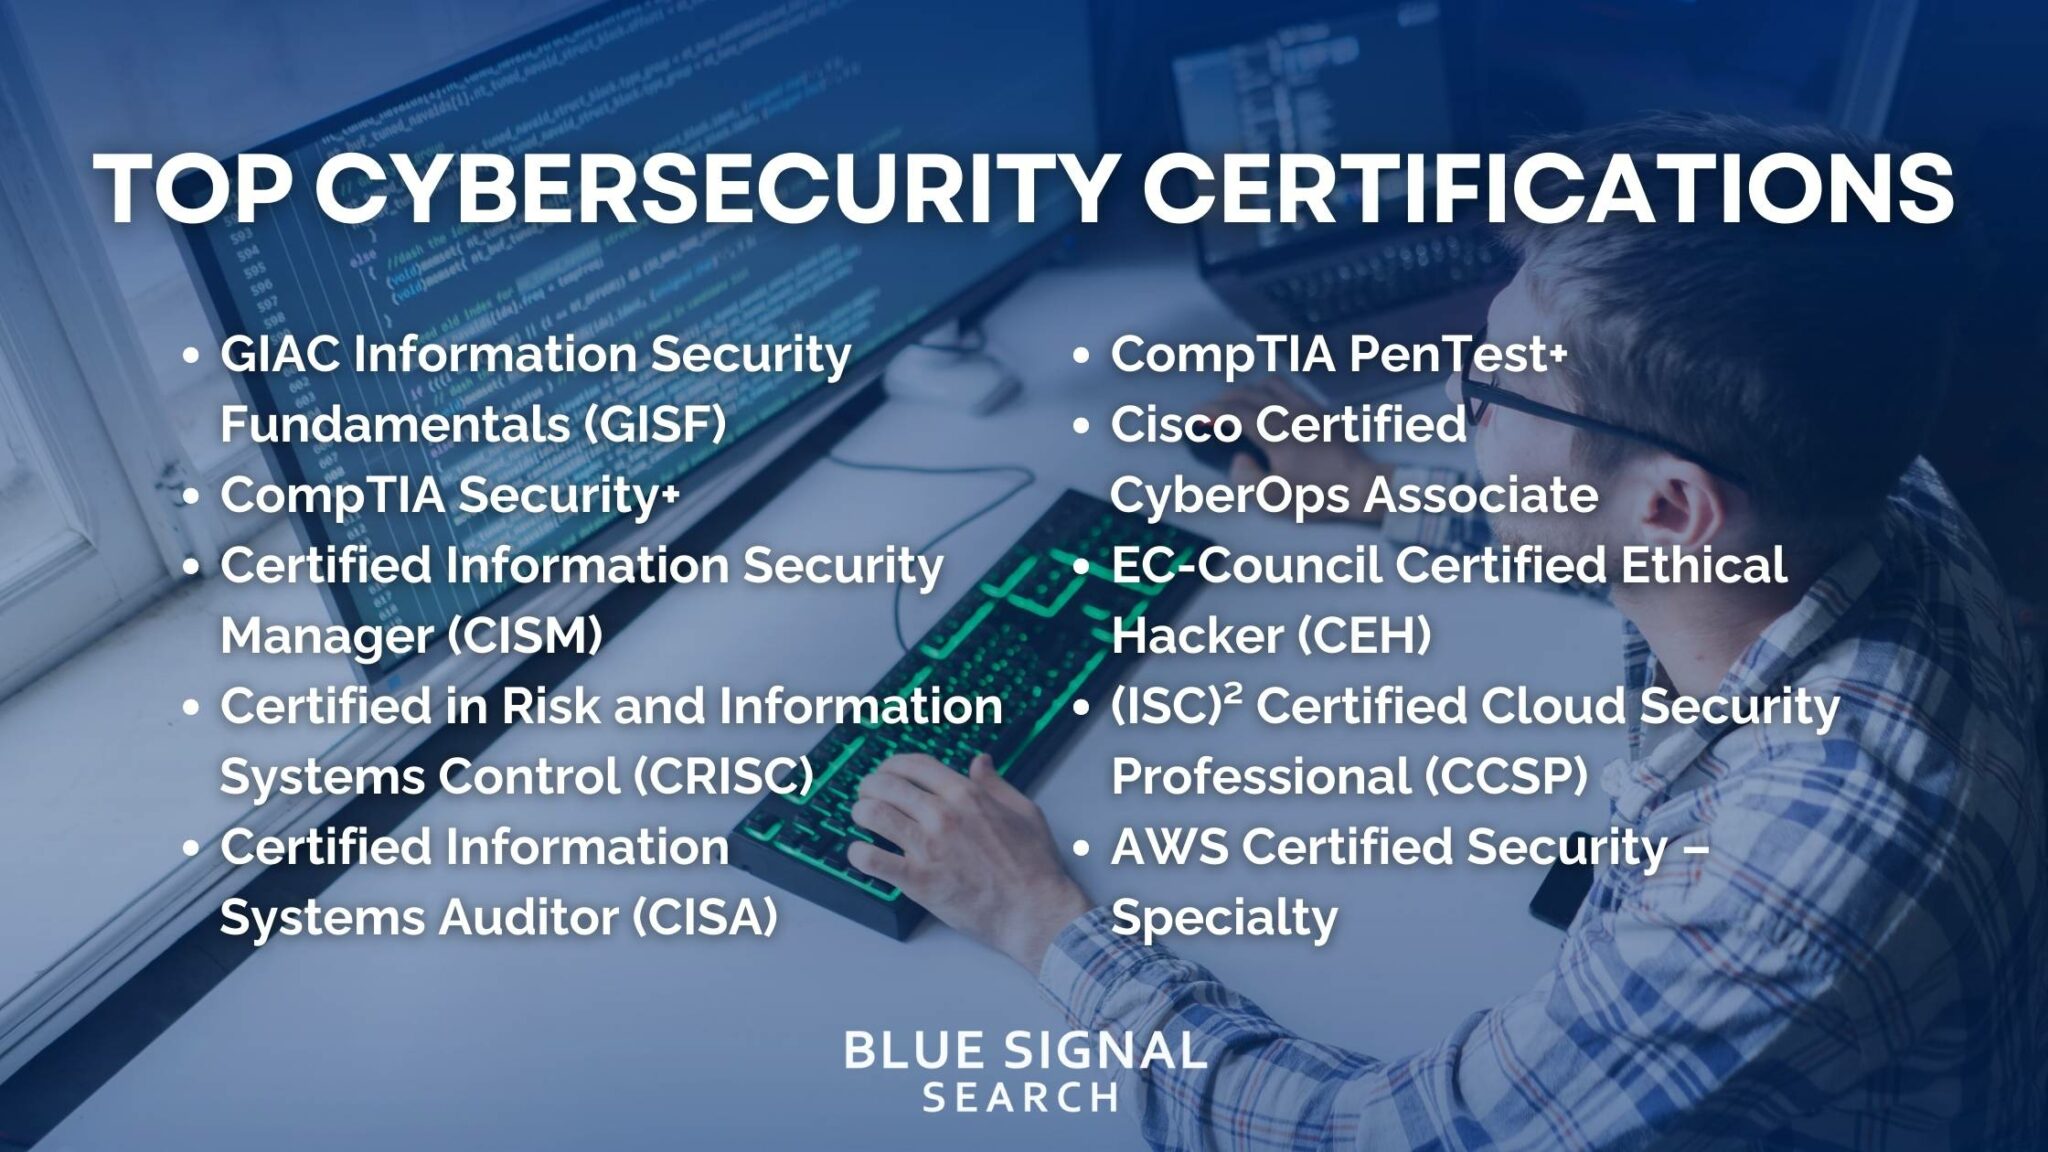 List of top cybersecurity certifications